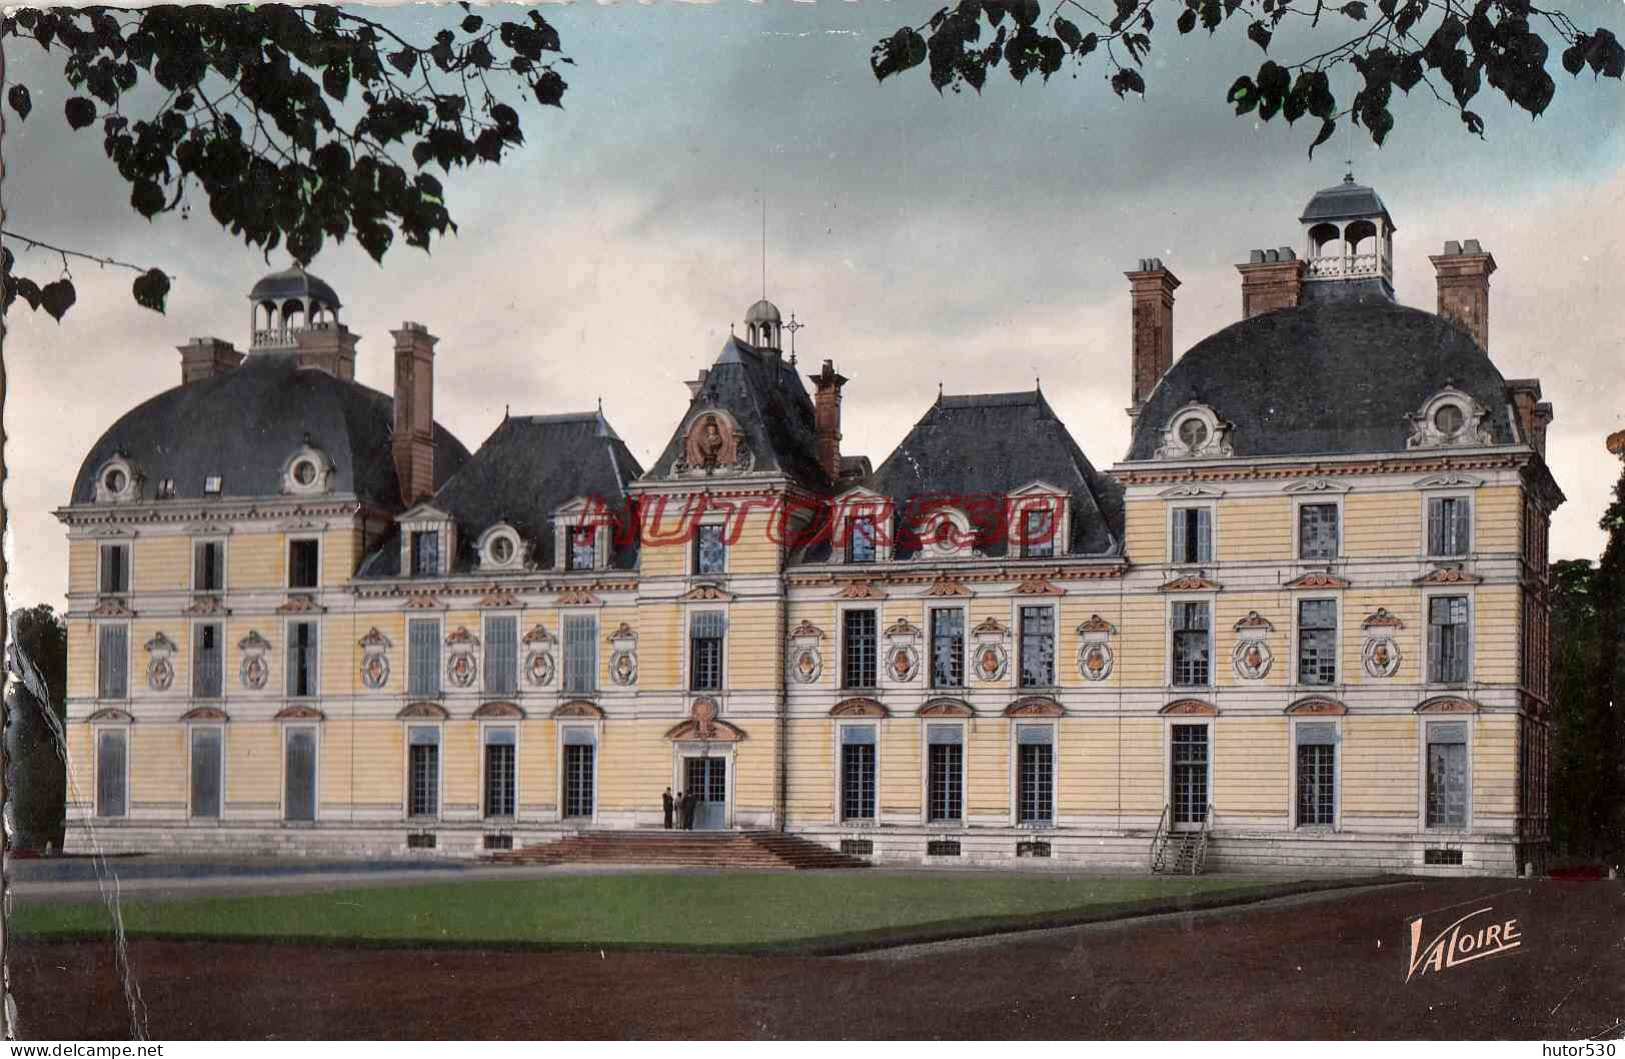 CPSM CHEVERNY - LE CHATEAU - Cheverny